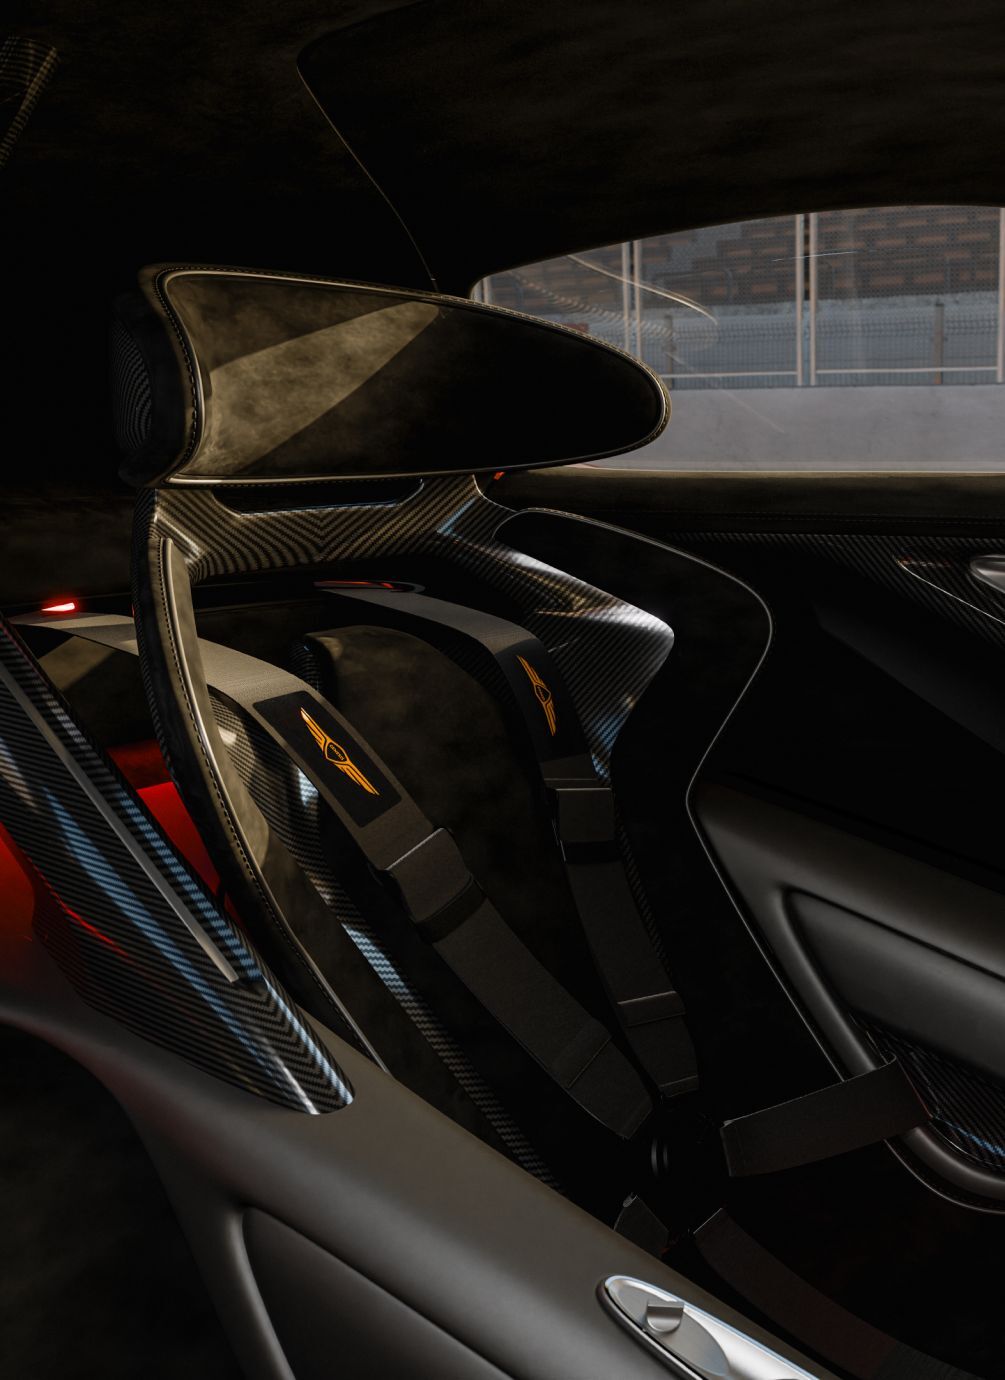 An angled view of the X Gran Racer Concept’s interior reveals both the driver and passenger seats, reclined further back than in typical cars. The interior is elegantly crafted in black and silver tones.